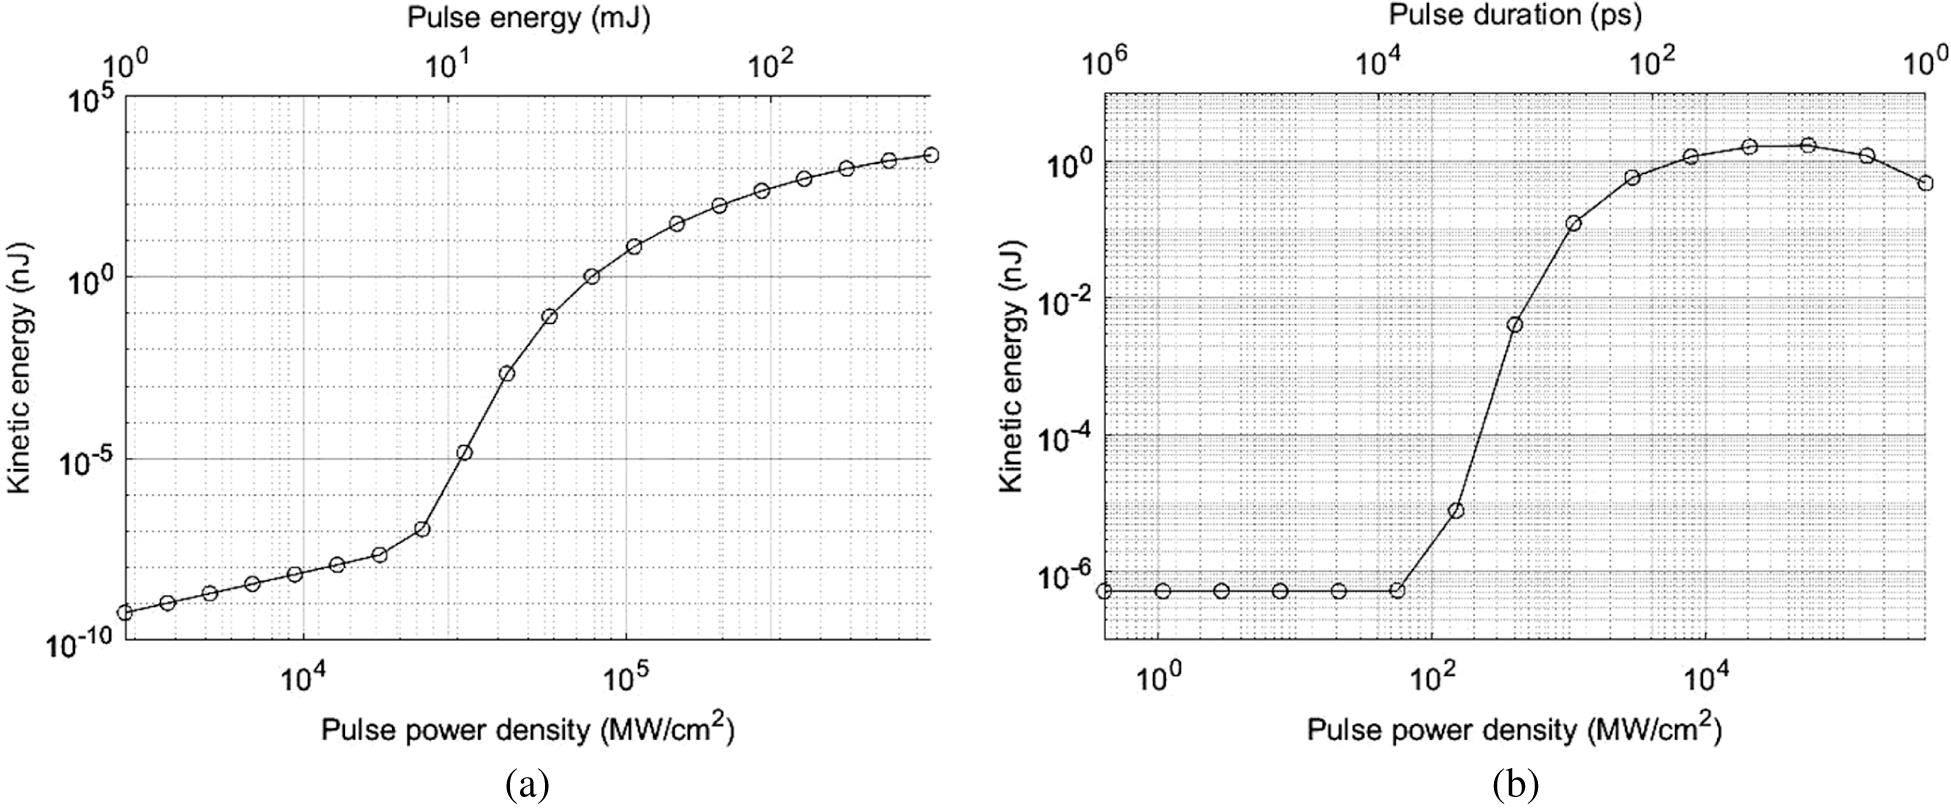 Simulation results of kinetic energy dependence on power density, controlled by: (a) pulse energy between 1 and 300 mJ, = 1064 nm, = 5.1 ps; (b) pulse duration between 1 ps and 1 μs for constant pulse energy = 30 mJ.